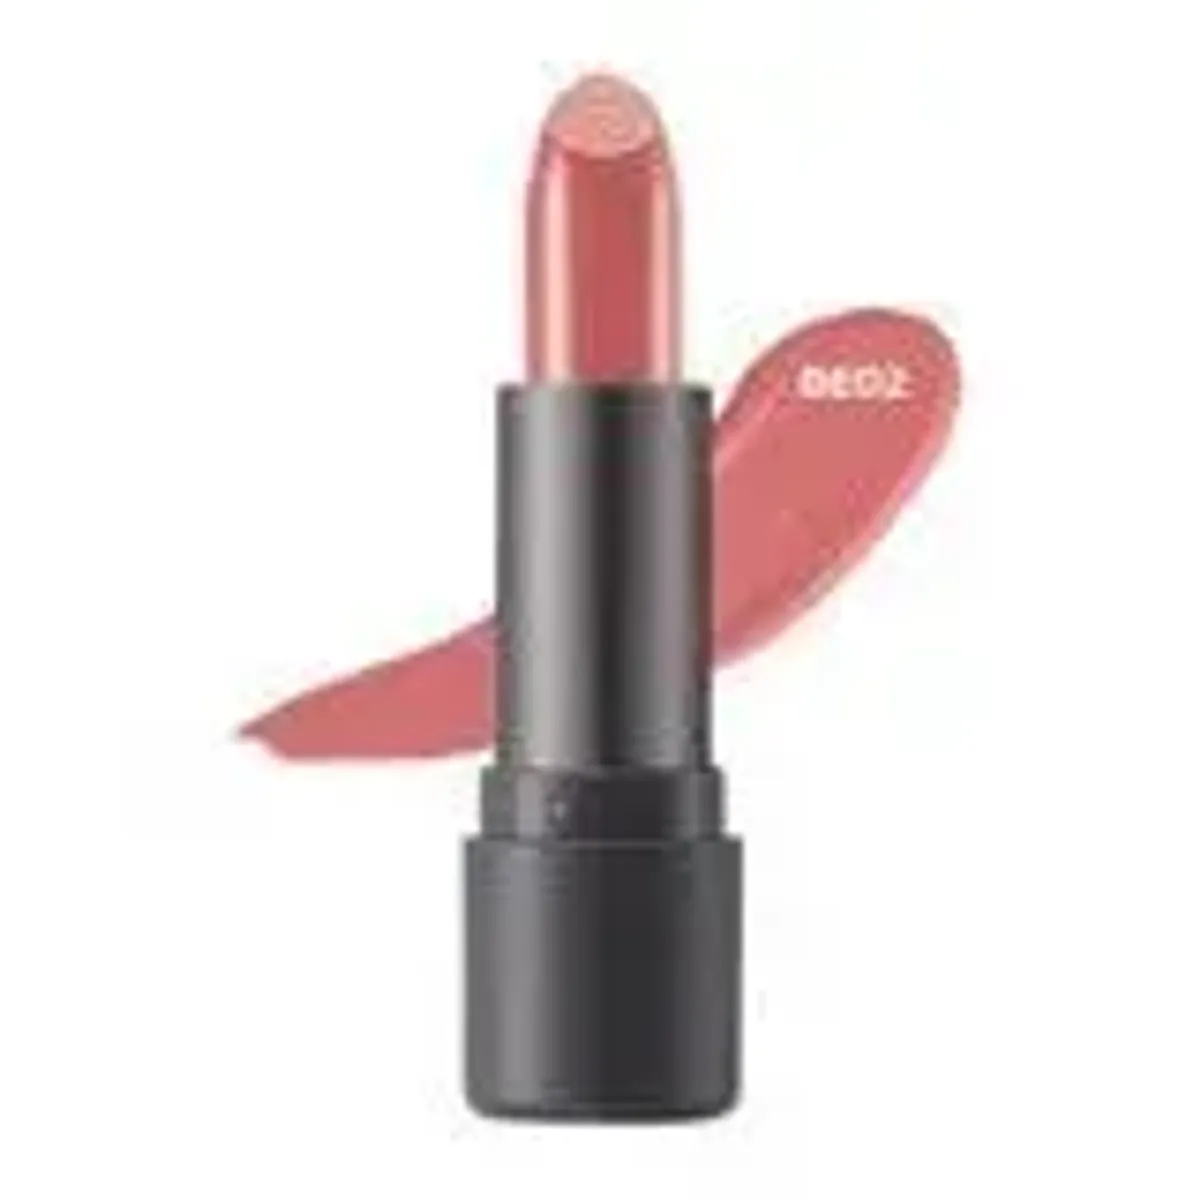 son-thoi-thefaceshop-moisture-touch-lipstick-be02-date-2020-1